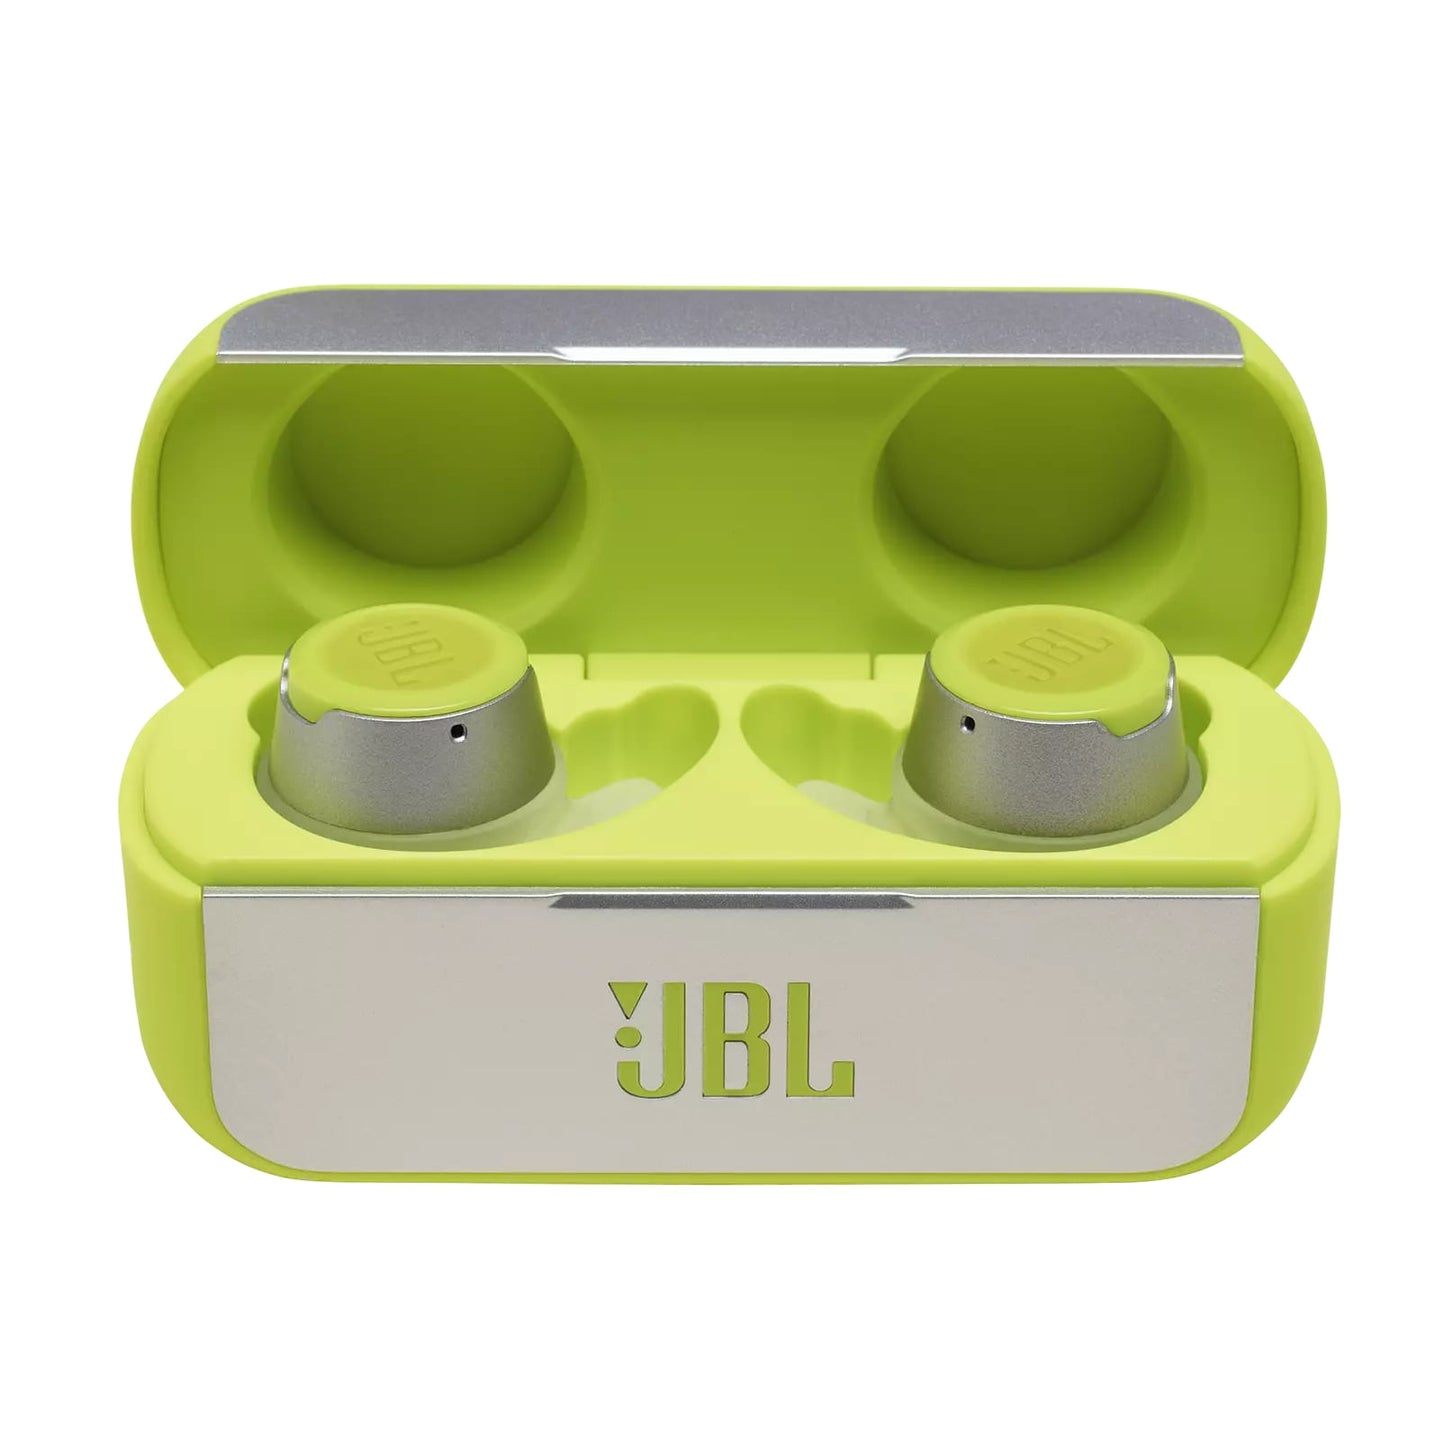 JBL Reflect Flow TWS True Wireless Bluetooth Earbuds with 30Hrs Total Battery, IP67 Waterproof Rating, Ambient Aware and Talkthru Feature for Outdoor Workout and Sports (Green, Black, Blue, Teal)